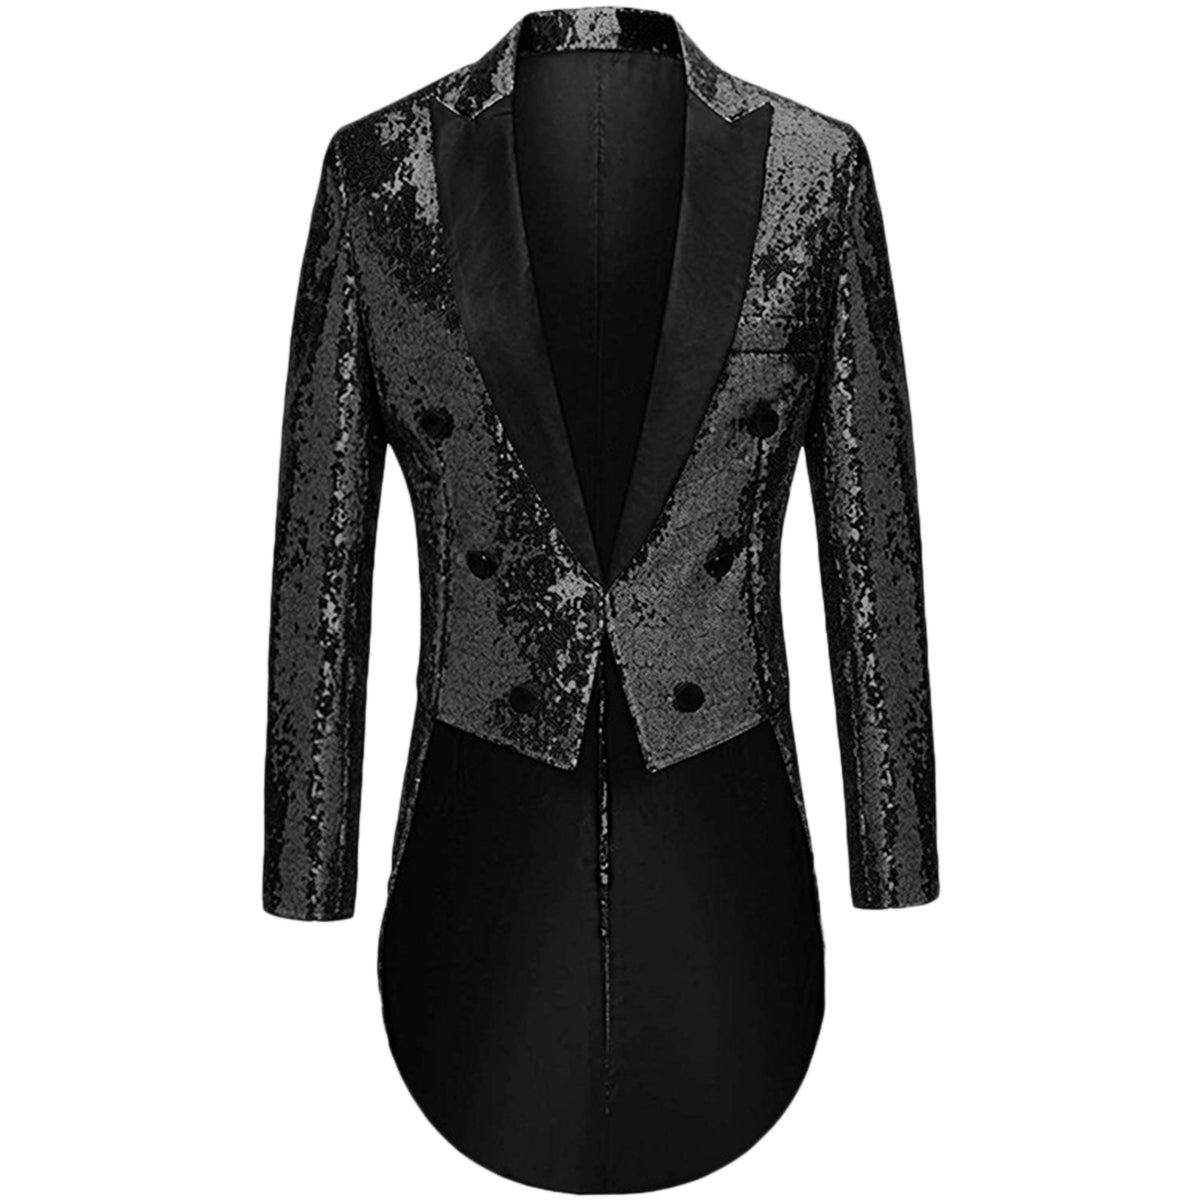 Men's Sequined Show Dress Swallow-Tailed Coat Black